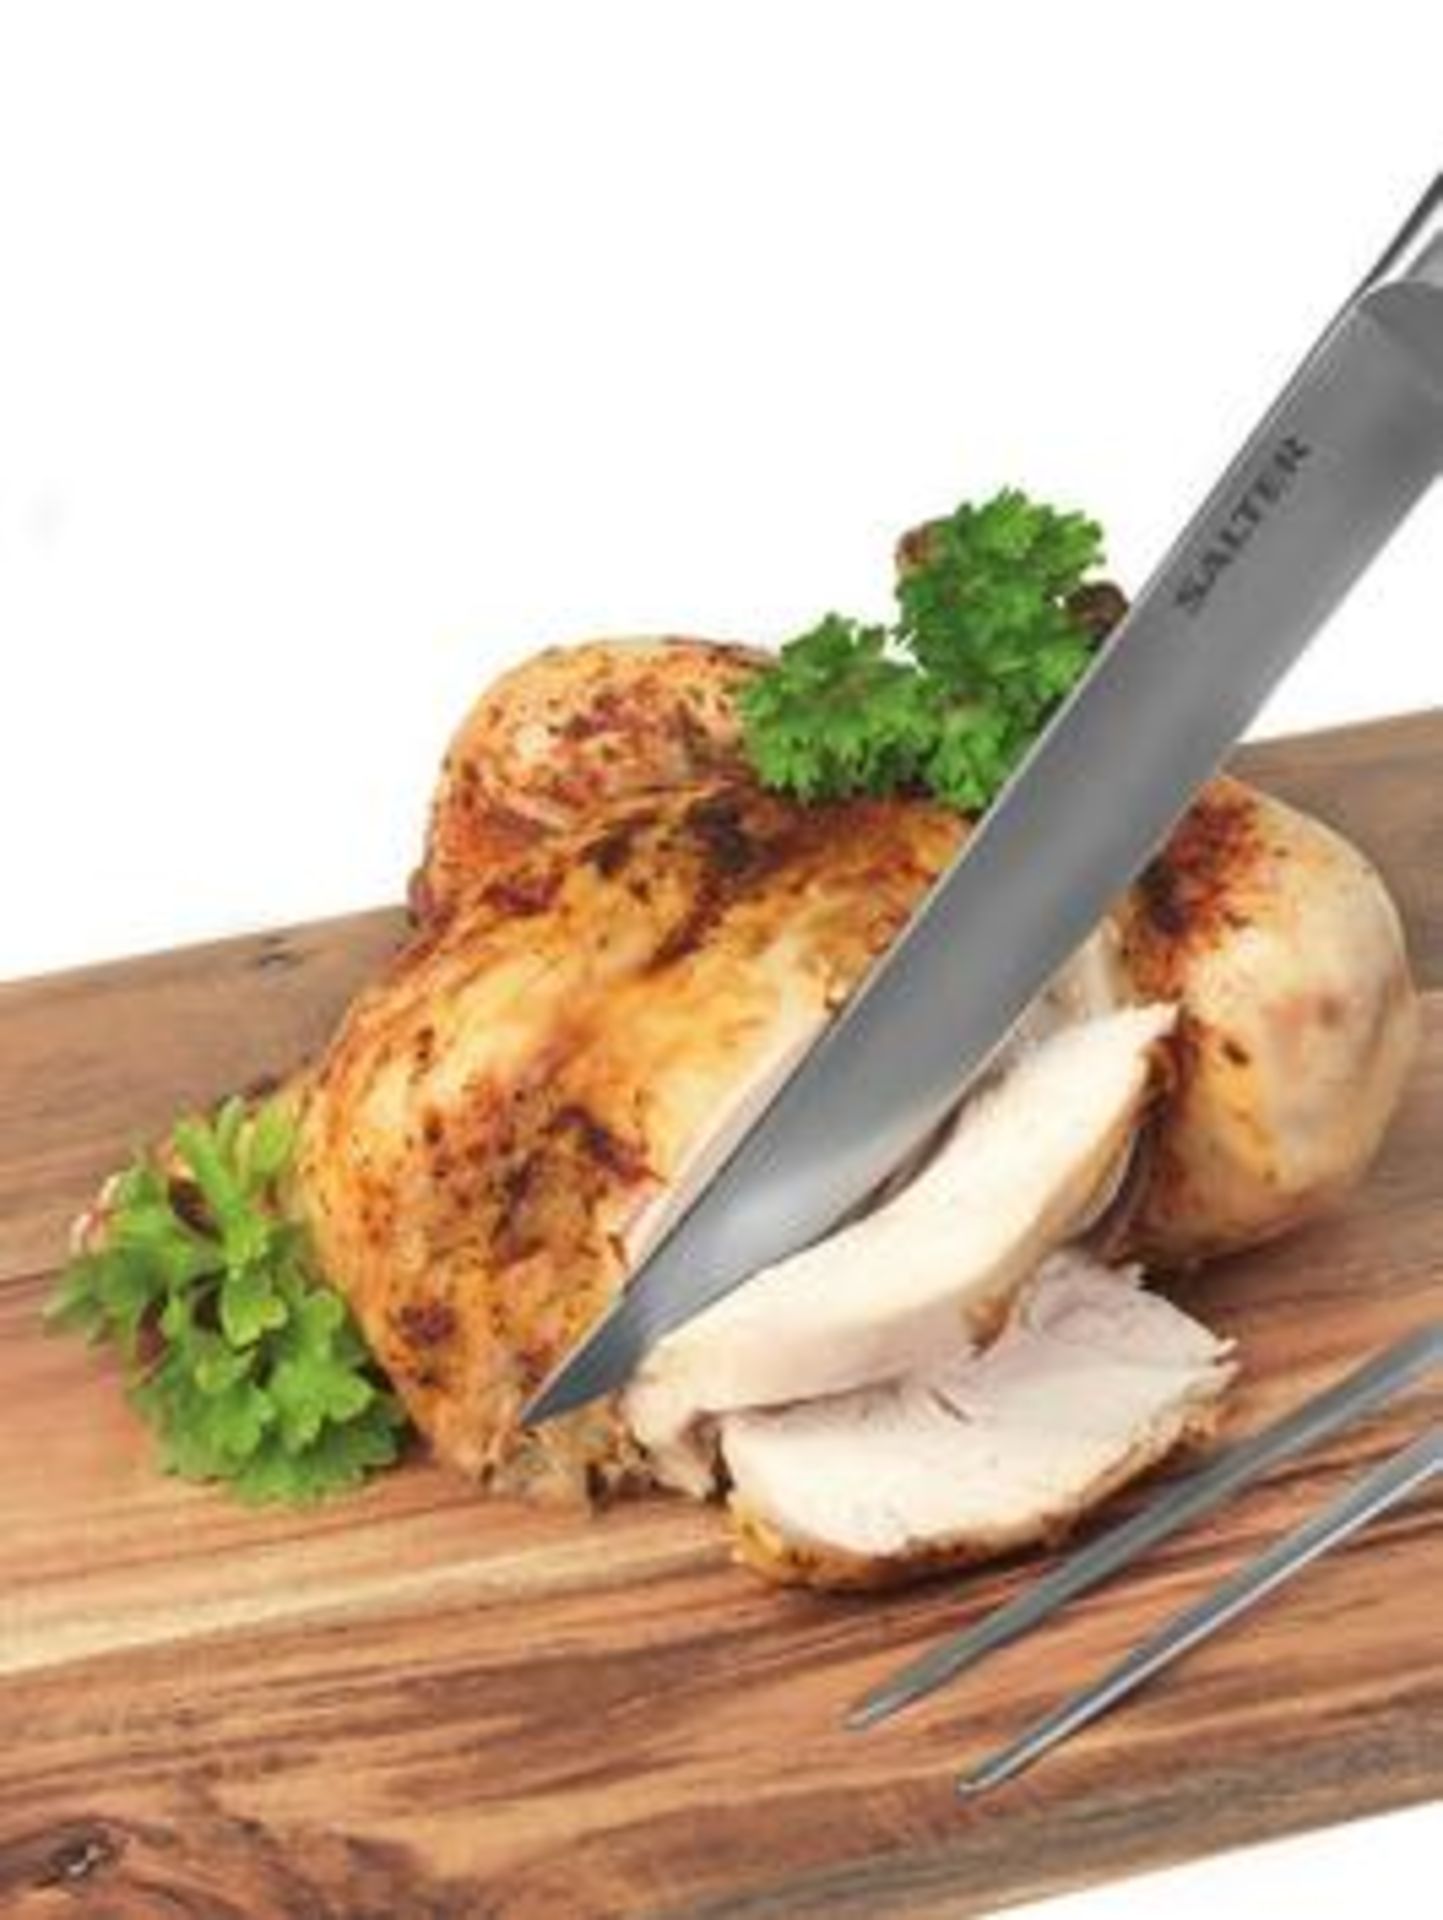 V Brand New Salter Elegance Carving Knife And Fork With Chopping Board ISP £46.99 (Mahahome.com) - Image 4 of 4